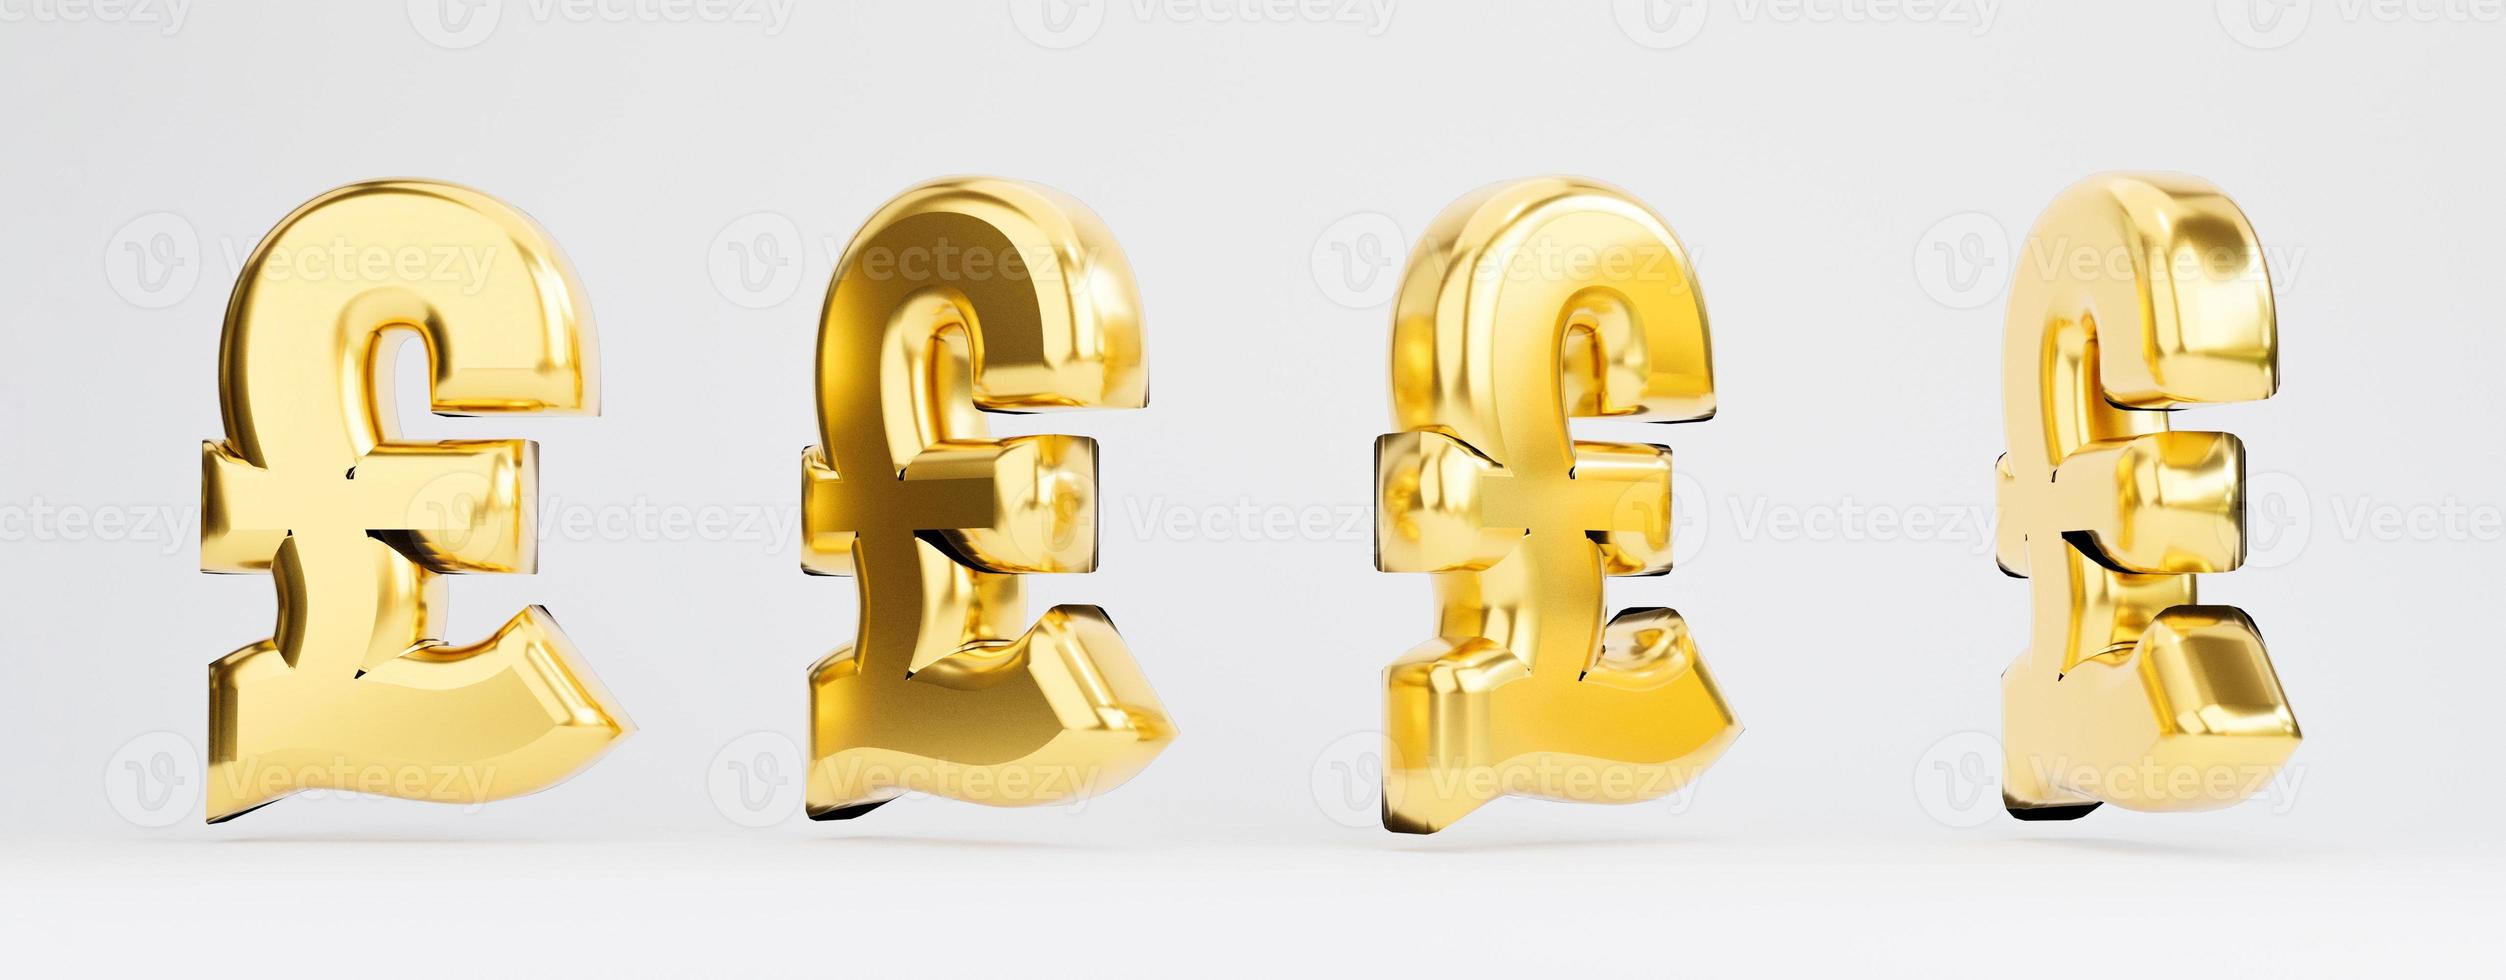 Isolation of golden Pound sign in different view on white background , Pound  is United Kingdom and main currency exchange in the world by 3d render. photo